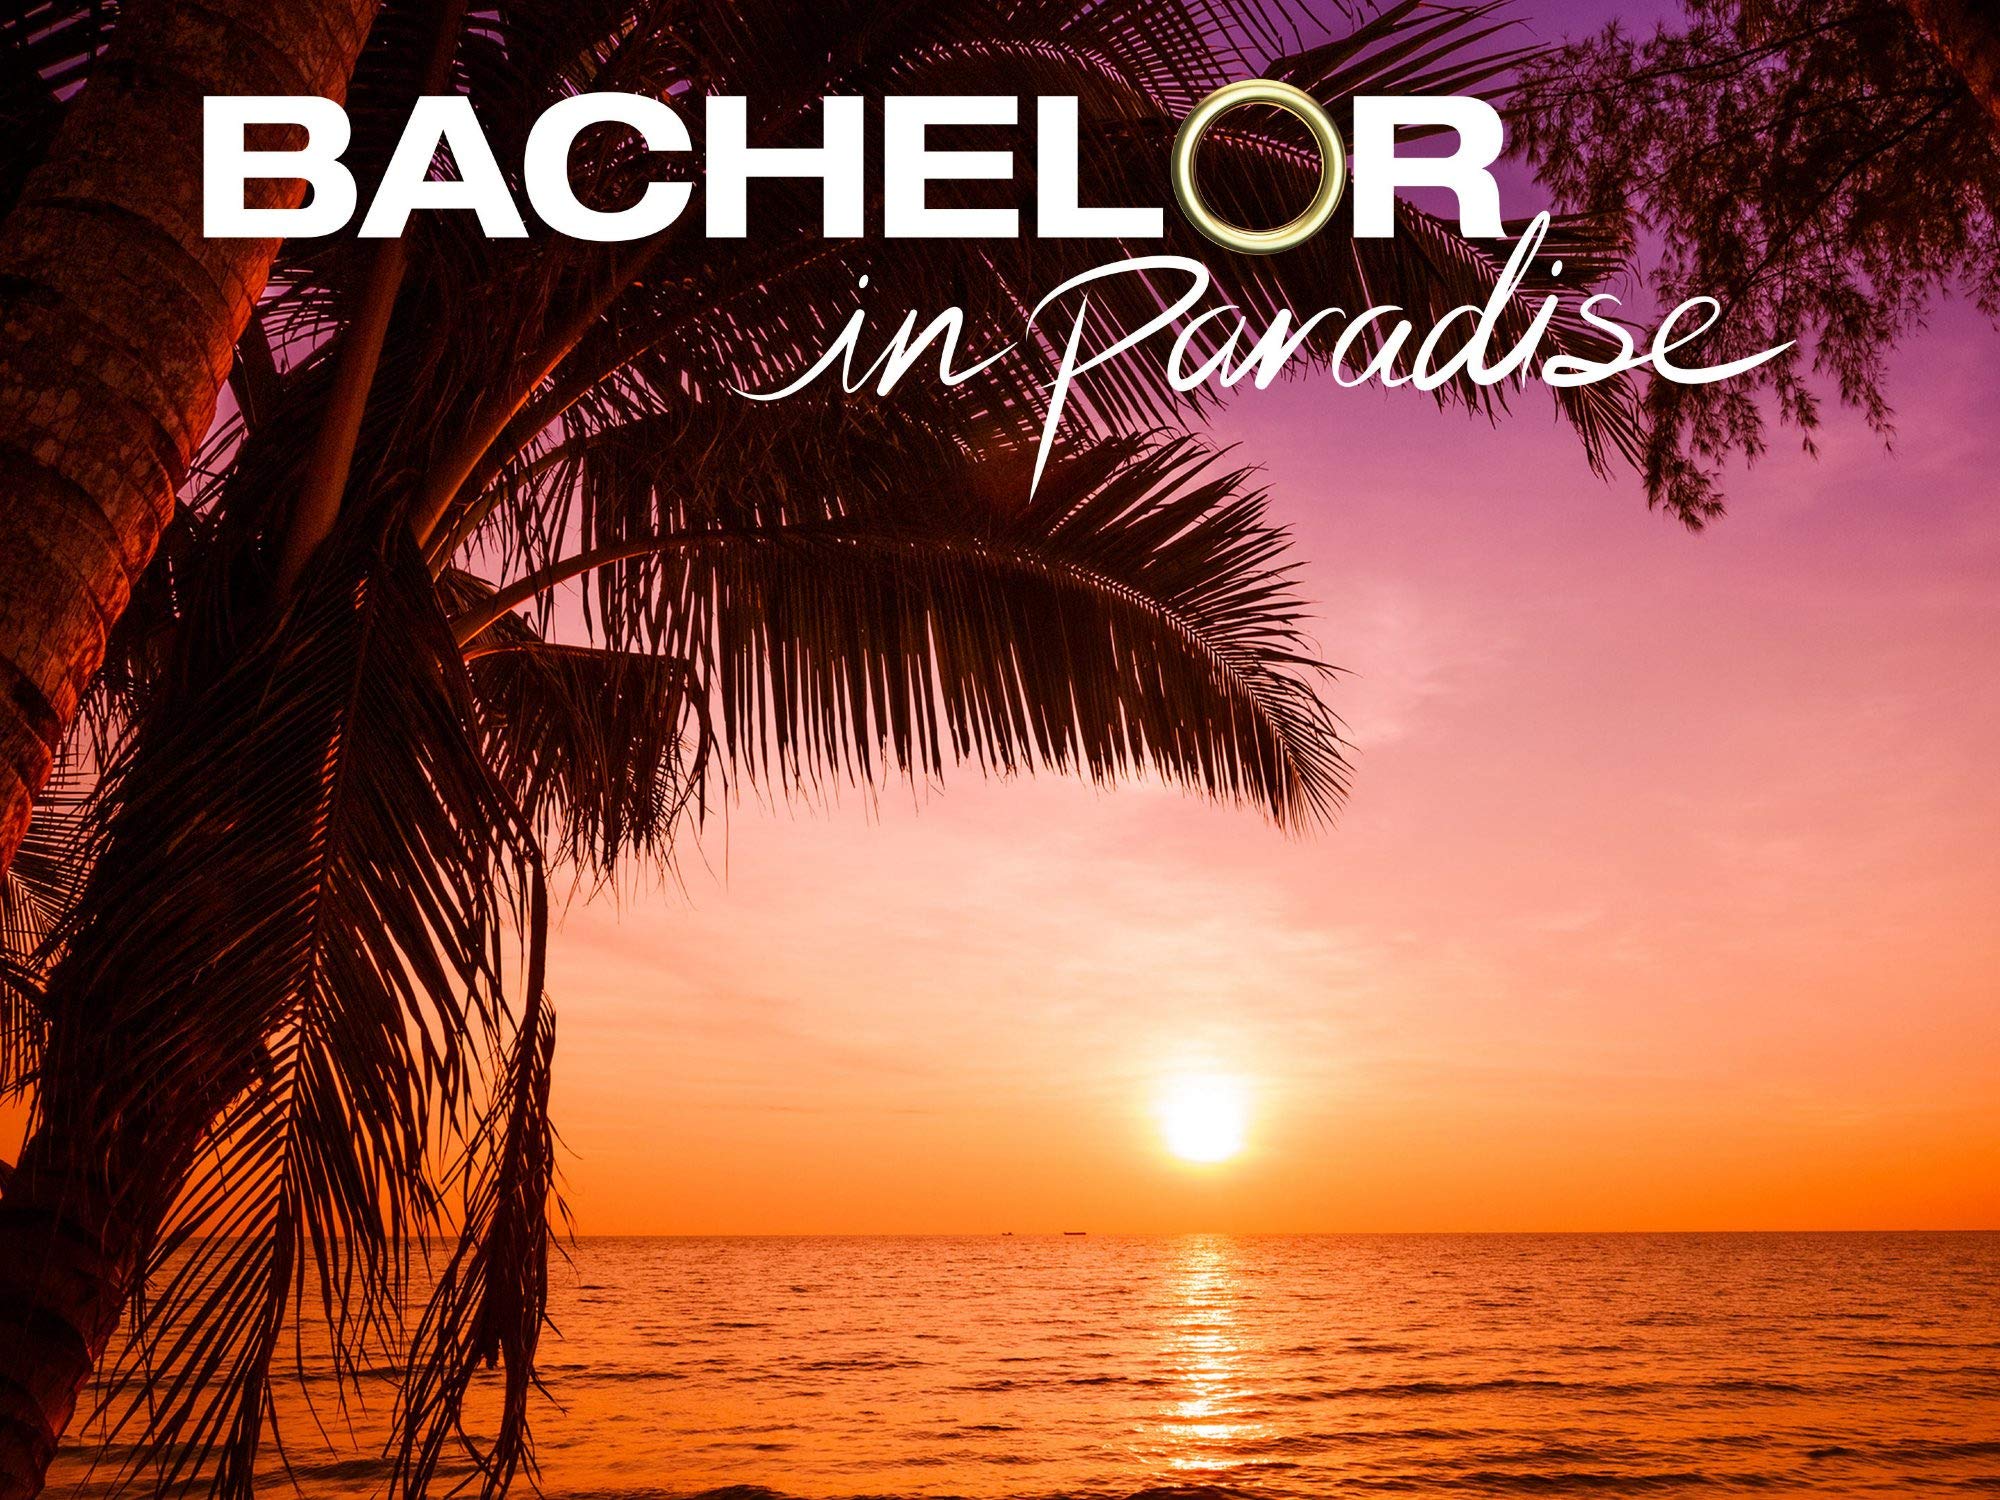 Bachelor In Paradise Tropical Island Hit By Tropical Storm And Cast Evacuated!